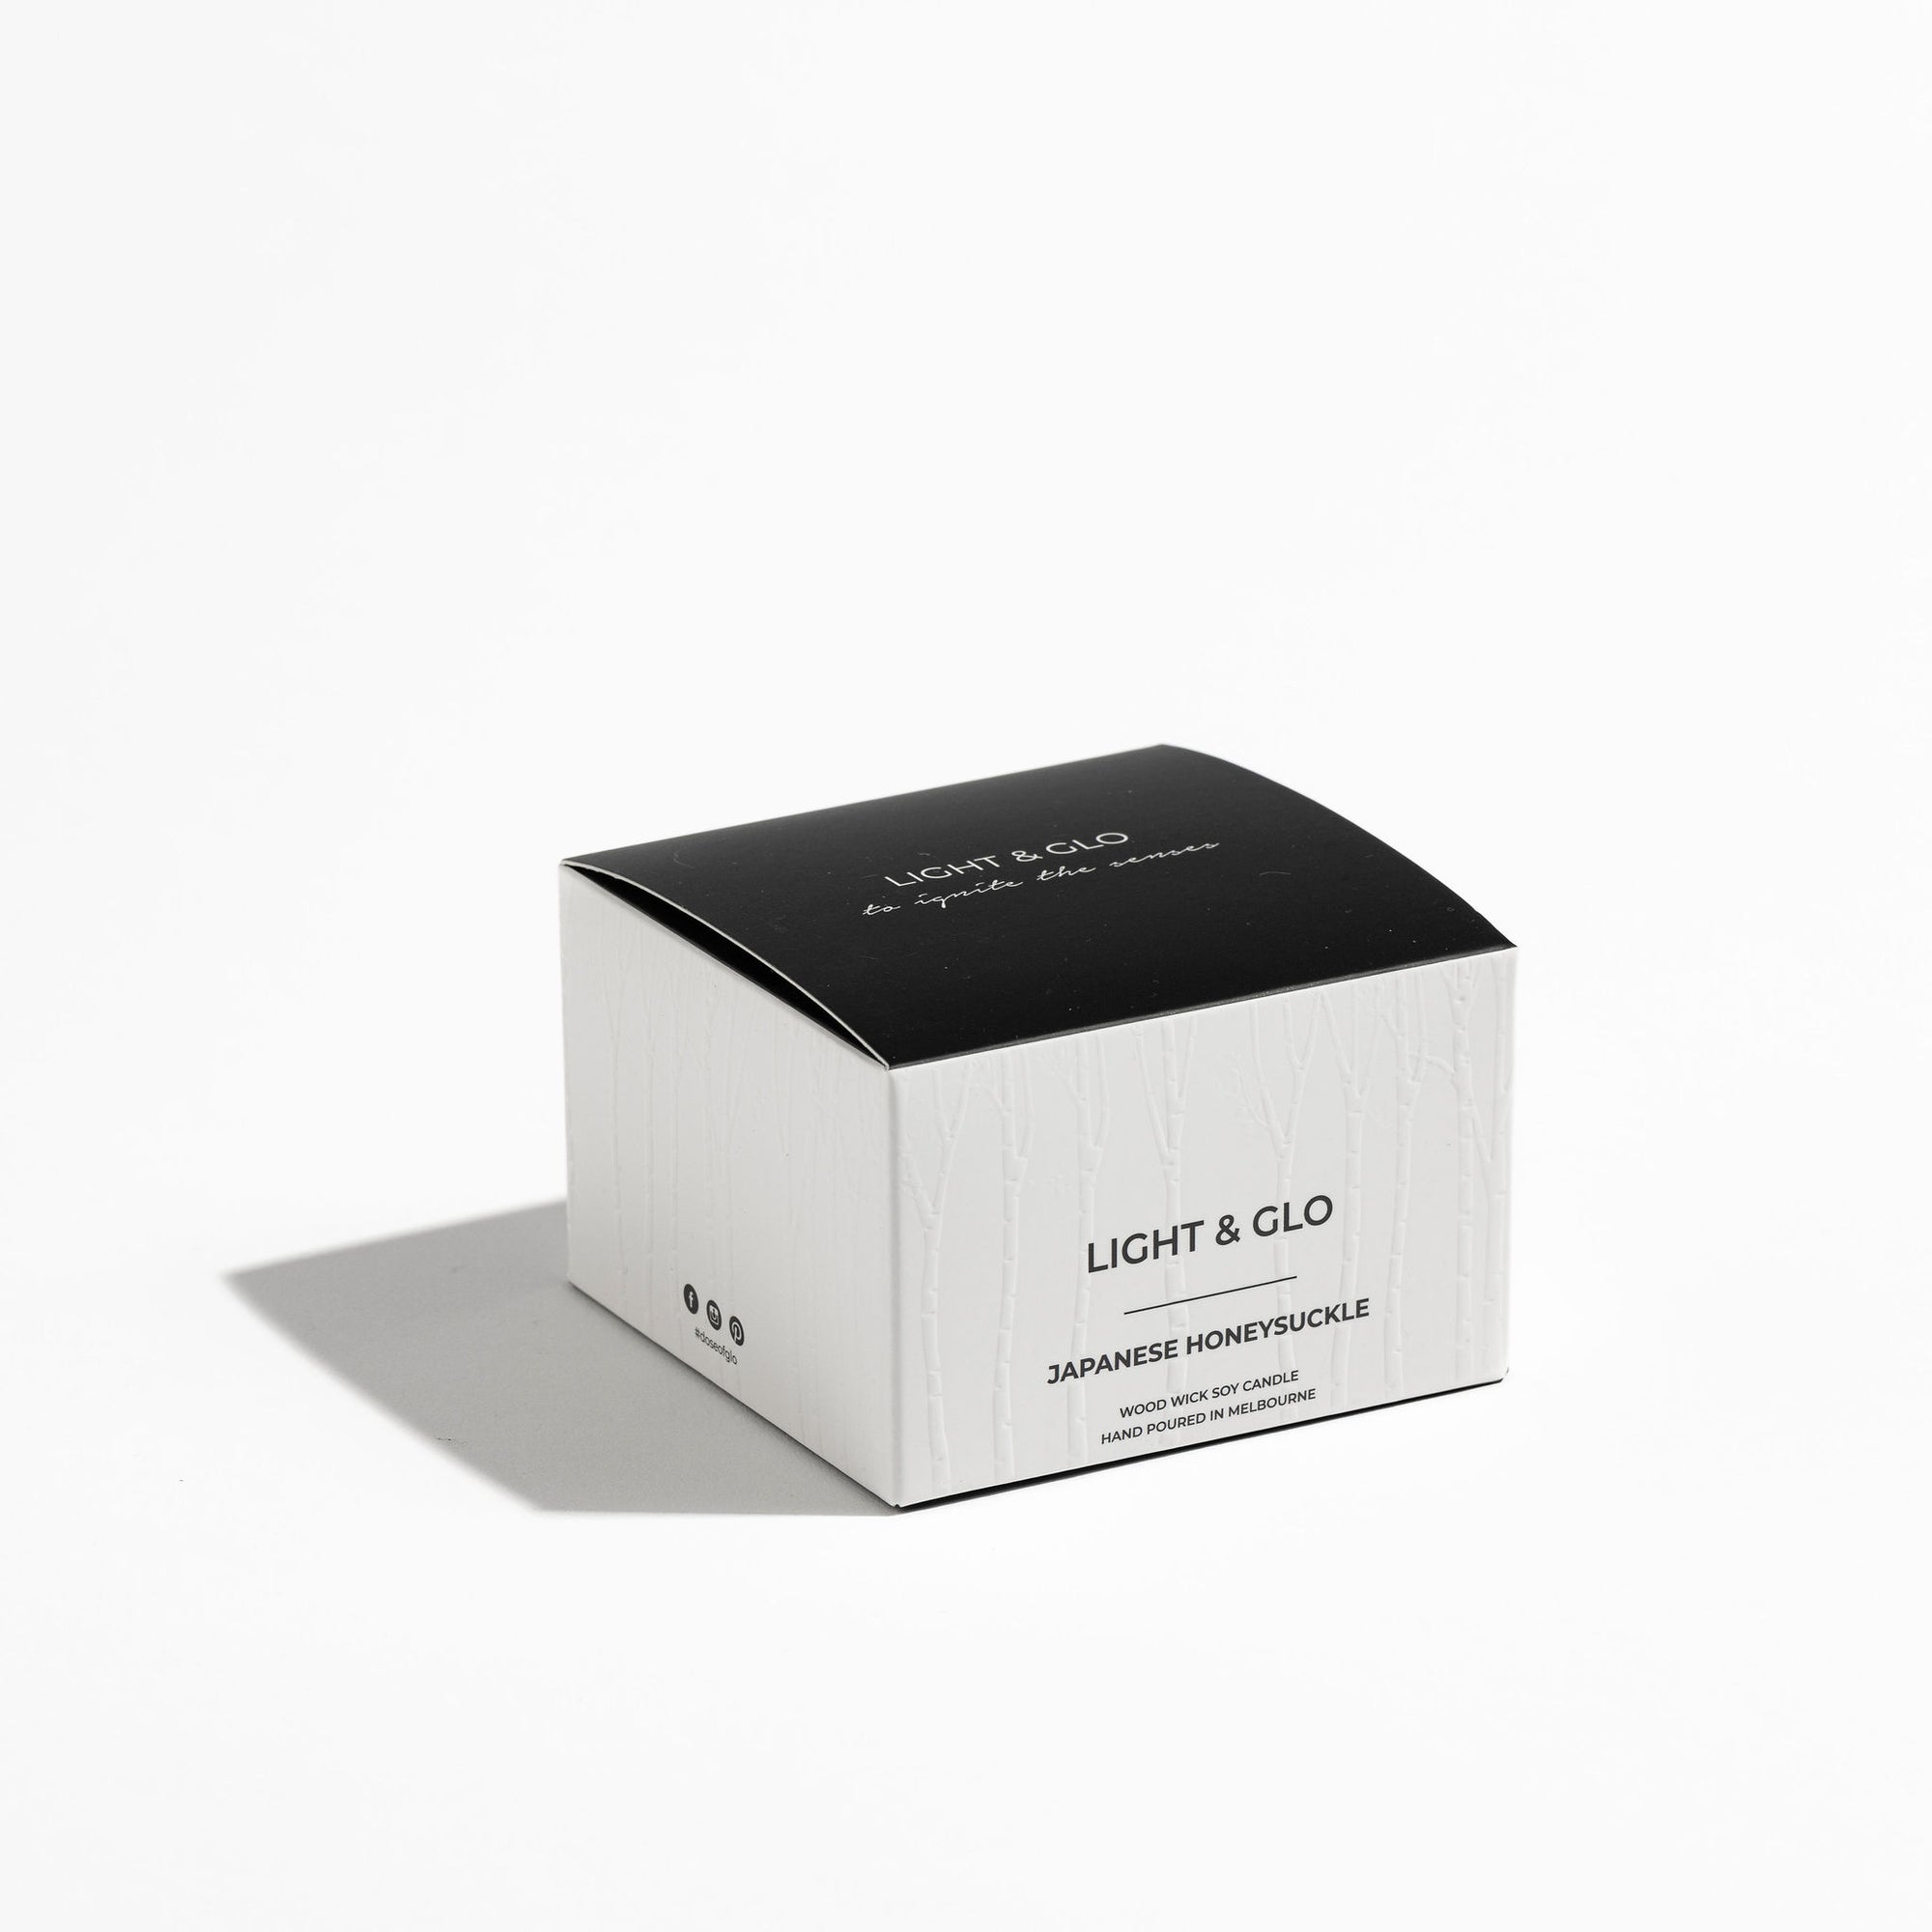 Japanese Honeysuckle - Monochrome Travel Candle | Luxury Candles & Home Fragrances by Light + Glo